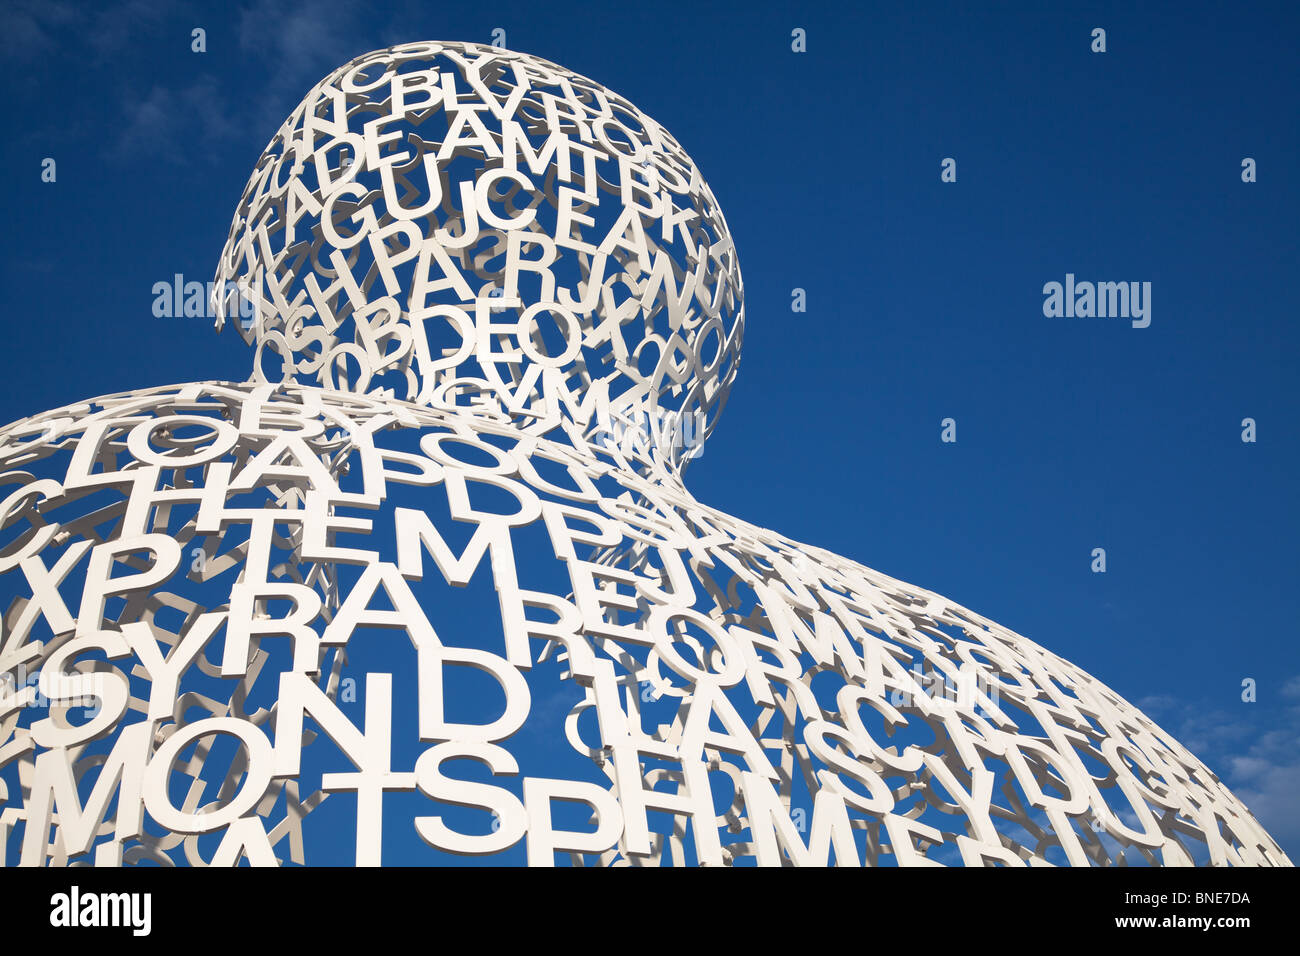 La Grande Nomade d'Antibes by Jaume Plensa, Antibes, France. the image shows the artwork against a deep blue sky Stock Photo